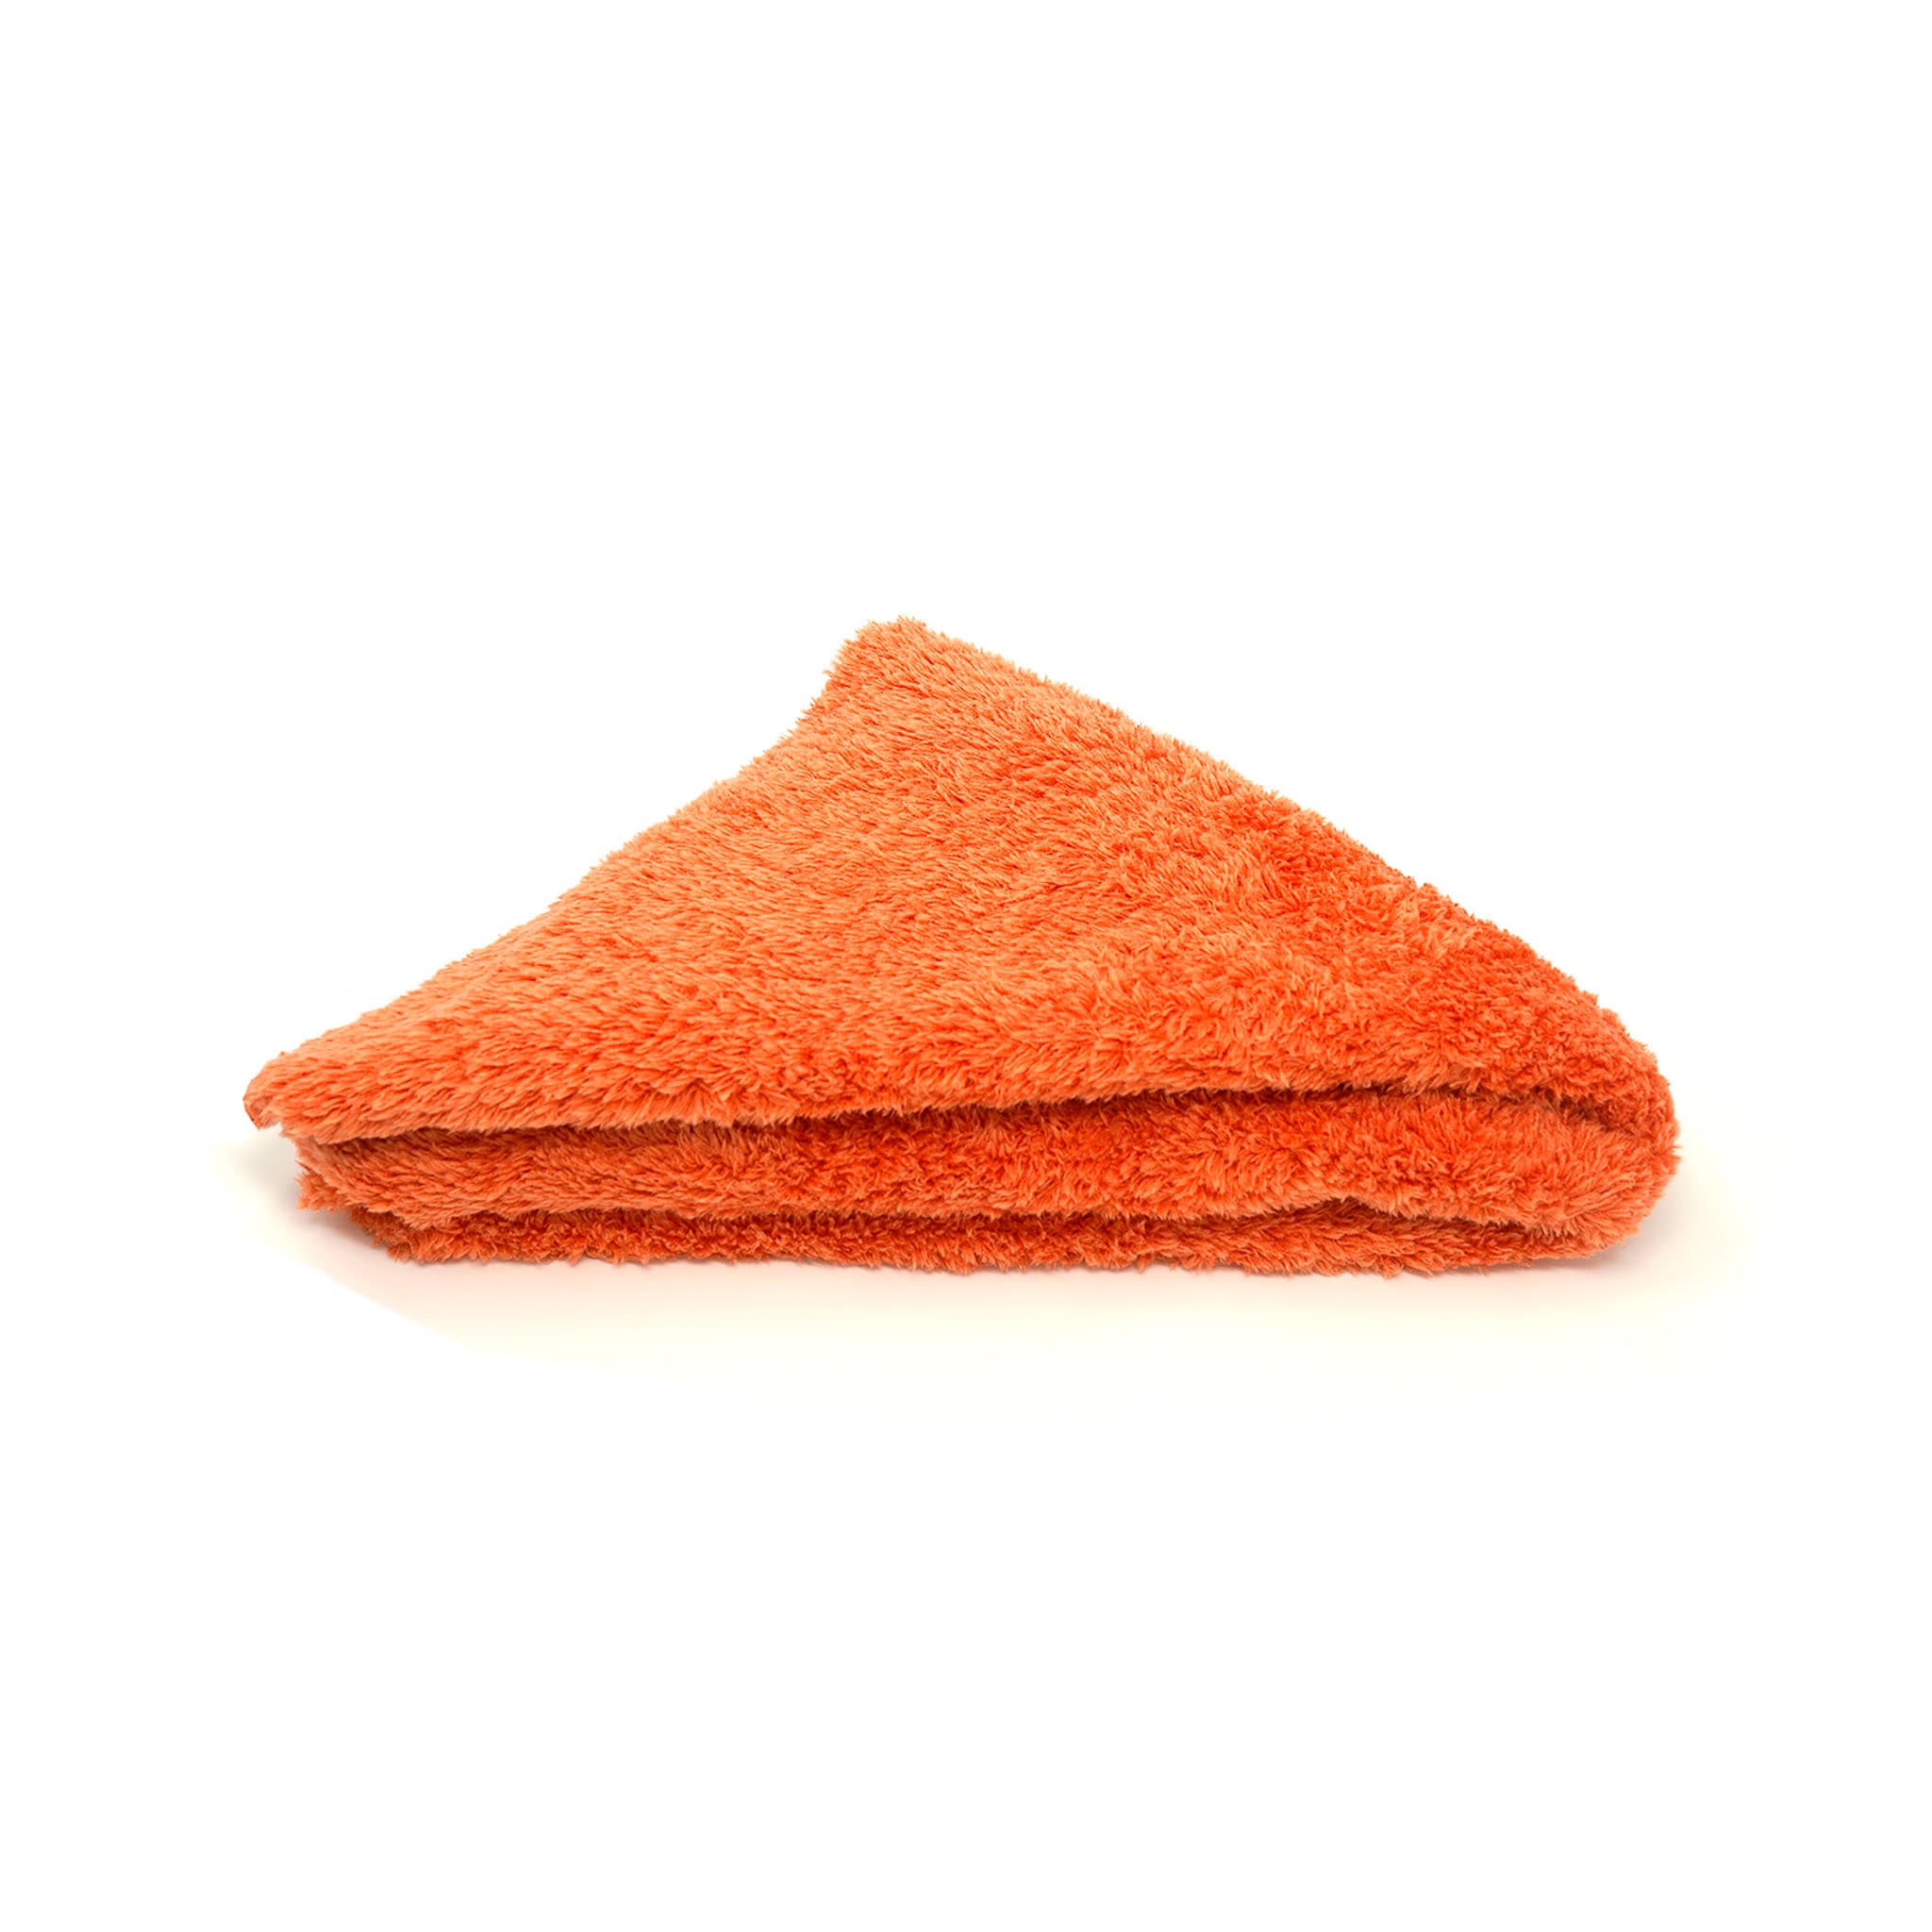 Scrub Daddy Damp Duster Towel (2 pack) NEW TO MARKET for Sale in